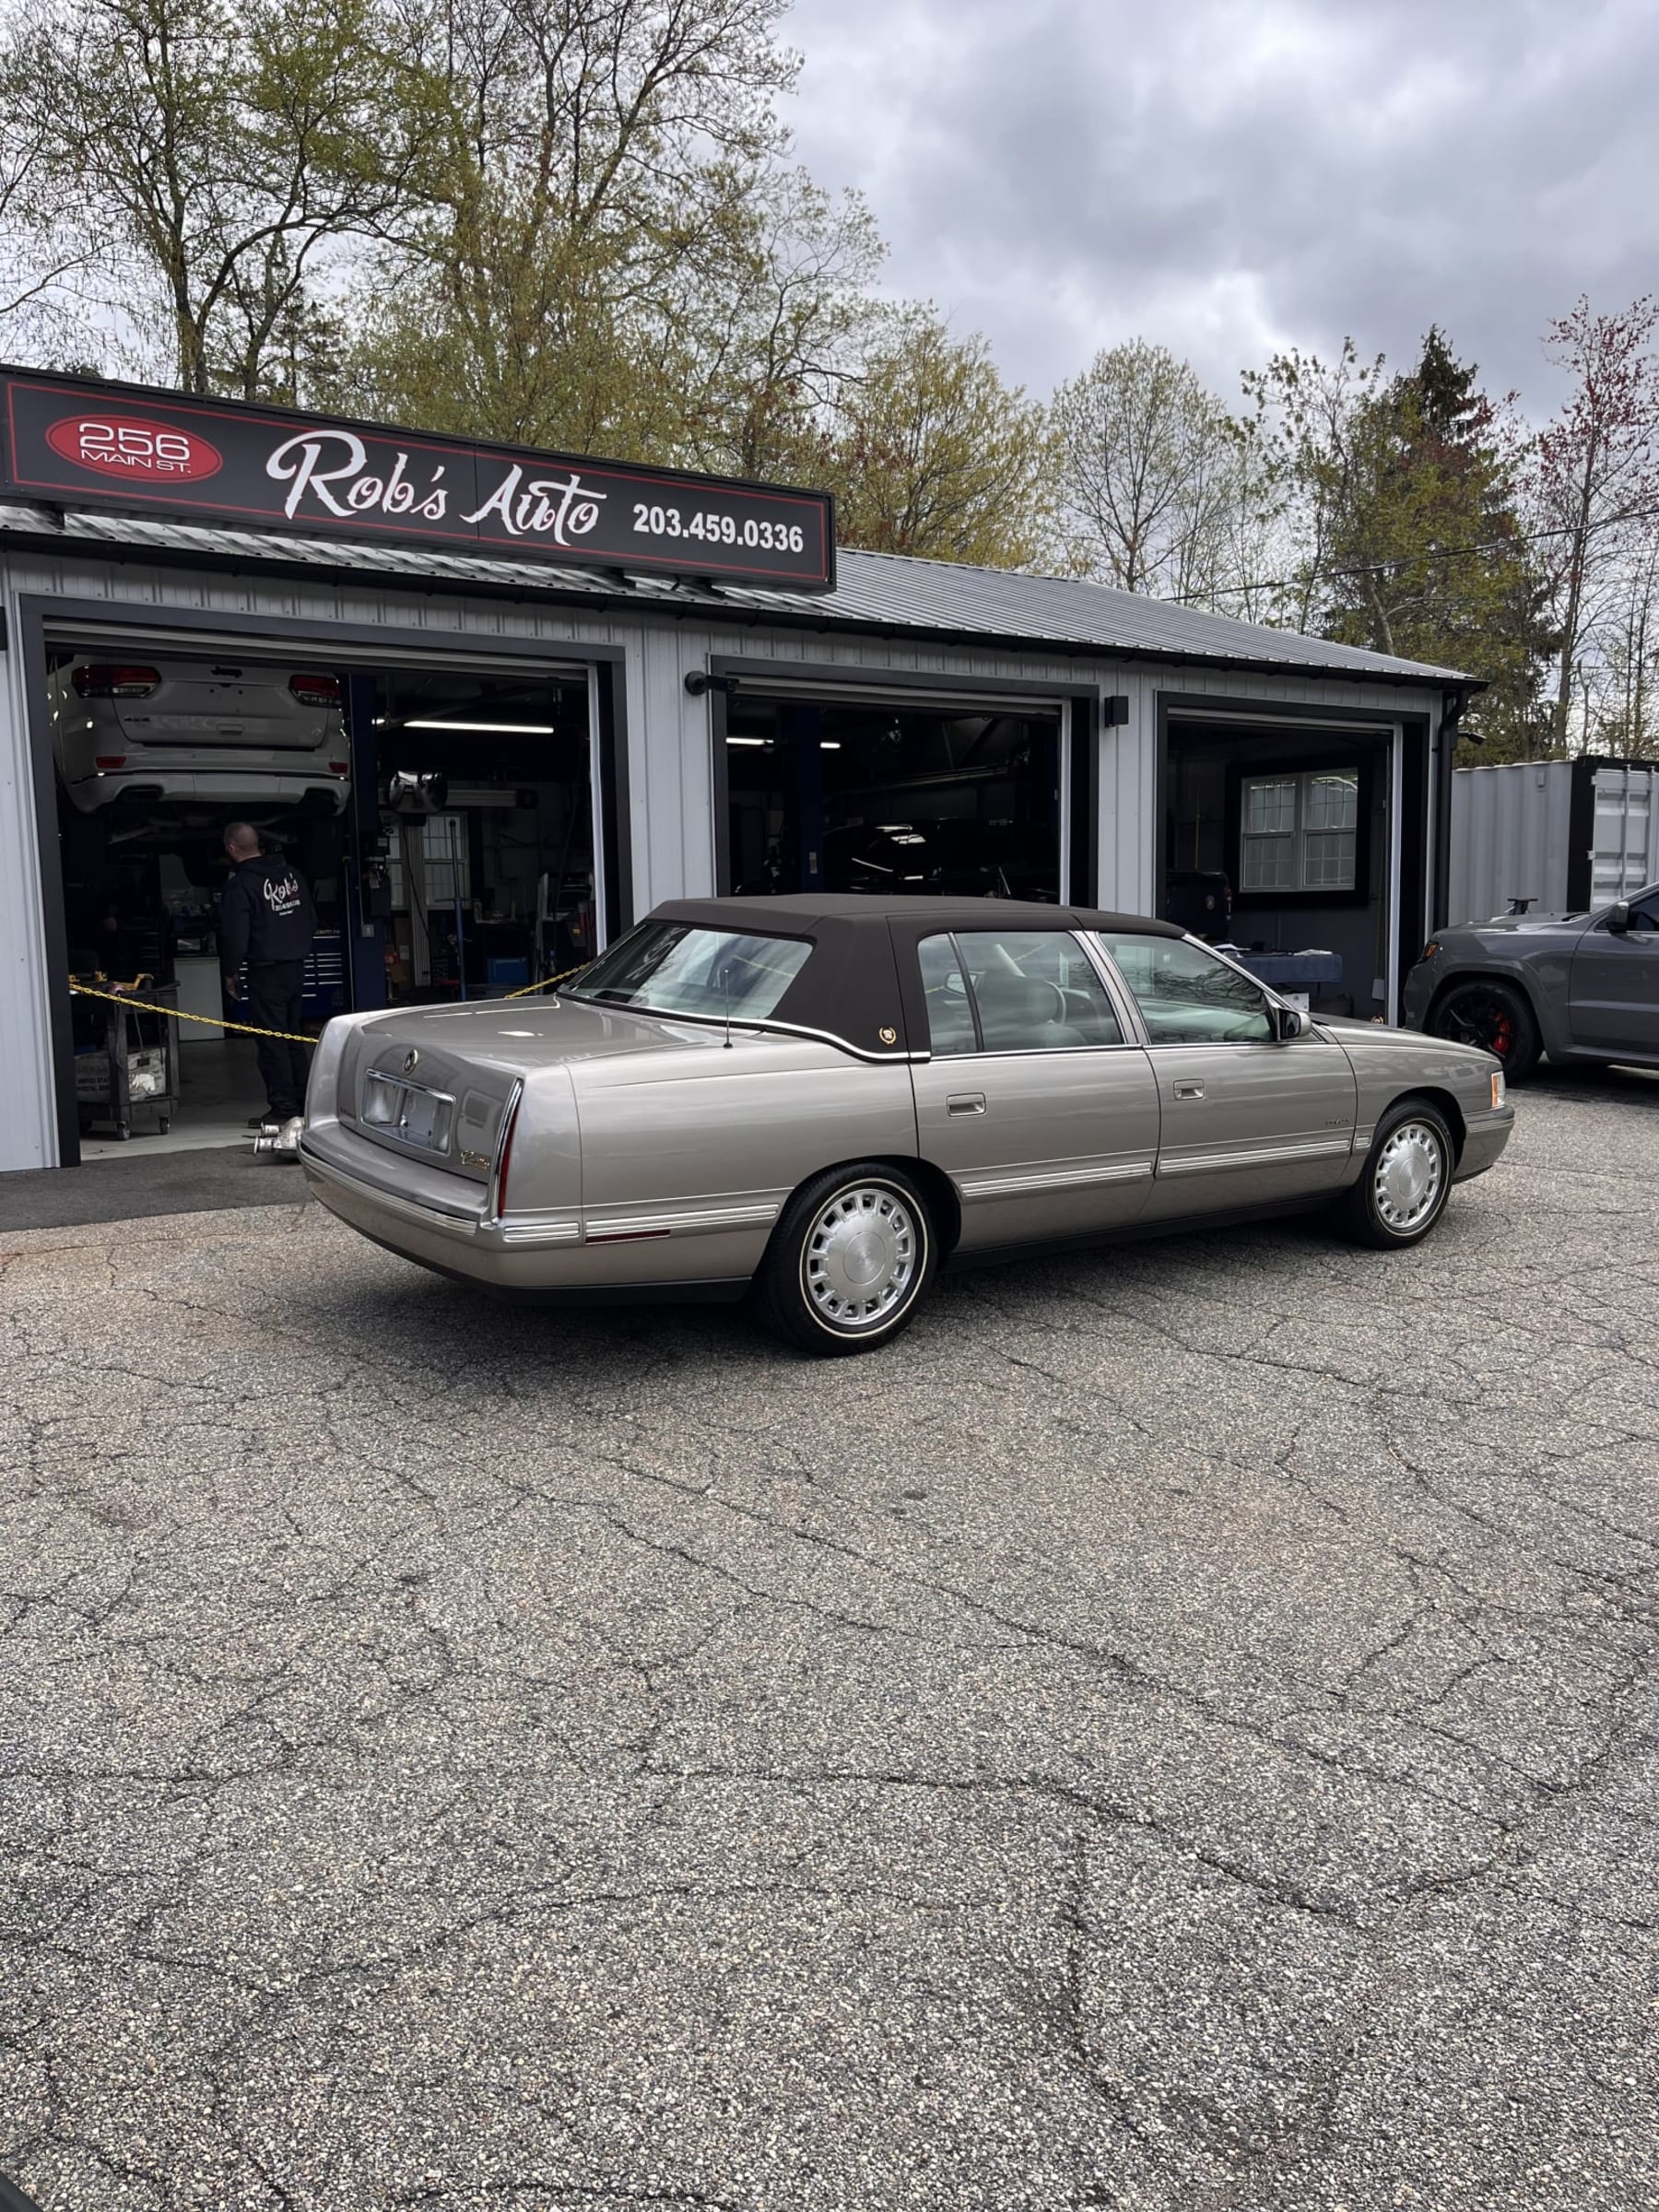 NEW ARRIVAL!! Looking for a diamond in the rough? Just in a 1999 Cadillac DeVille! 50 year golden anniversary edition!! ONLY 29,500 miles! Garaged its entire life! Runs and drives great!! Won’t last at $9,900!!